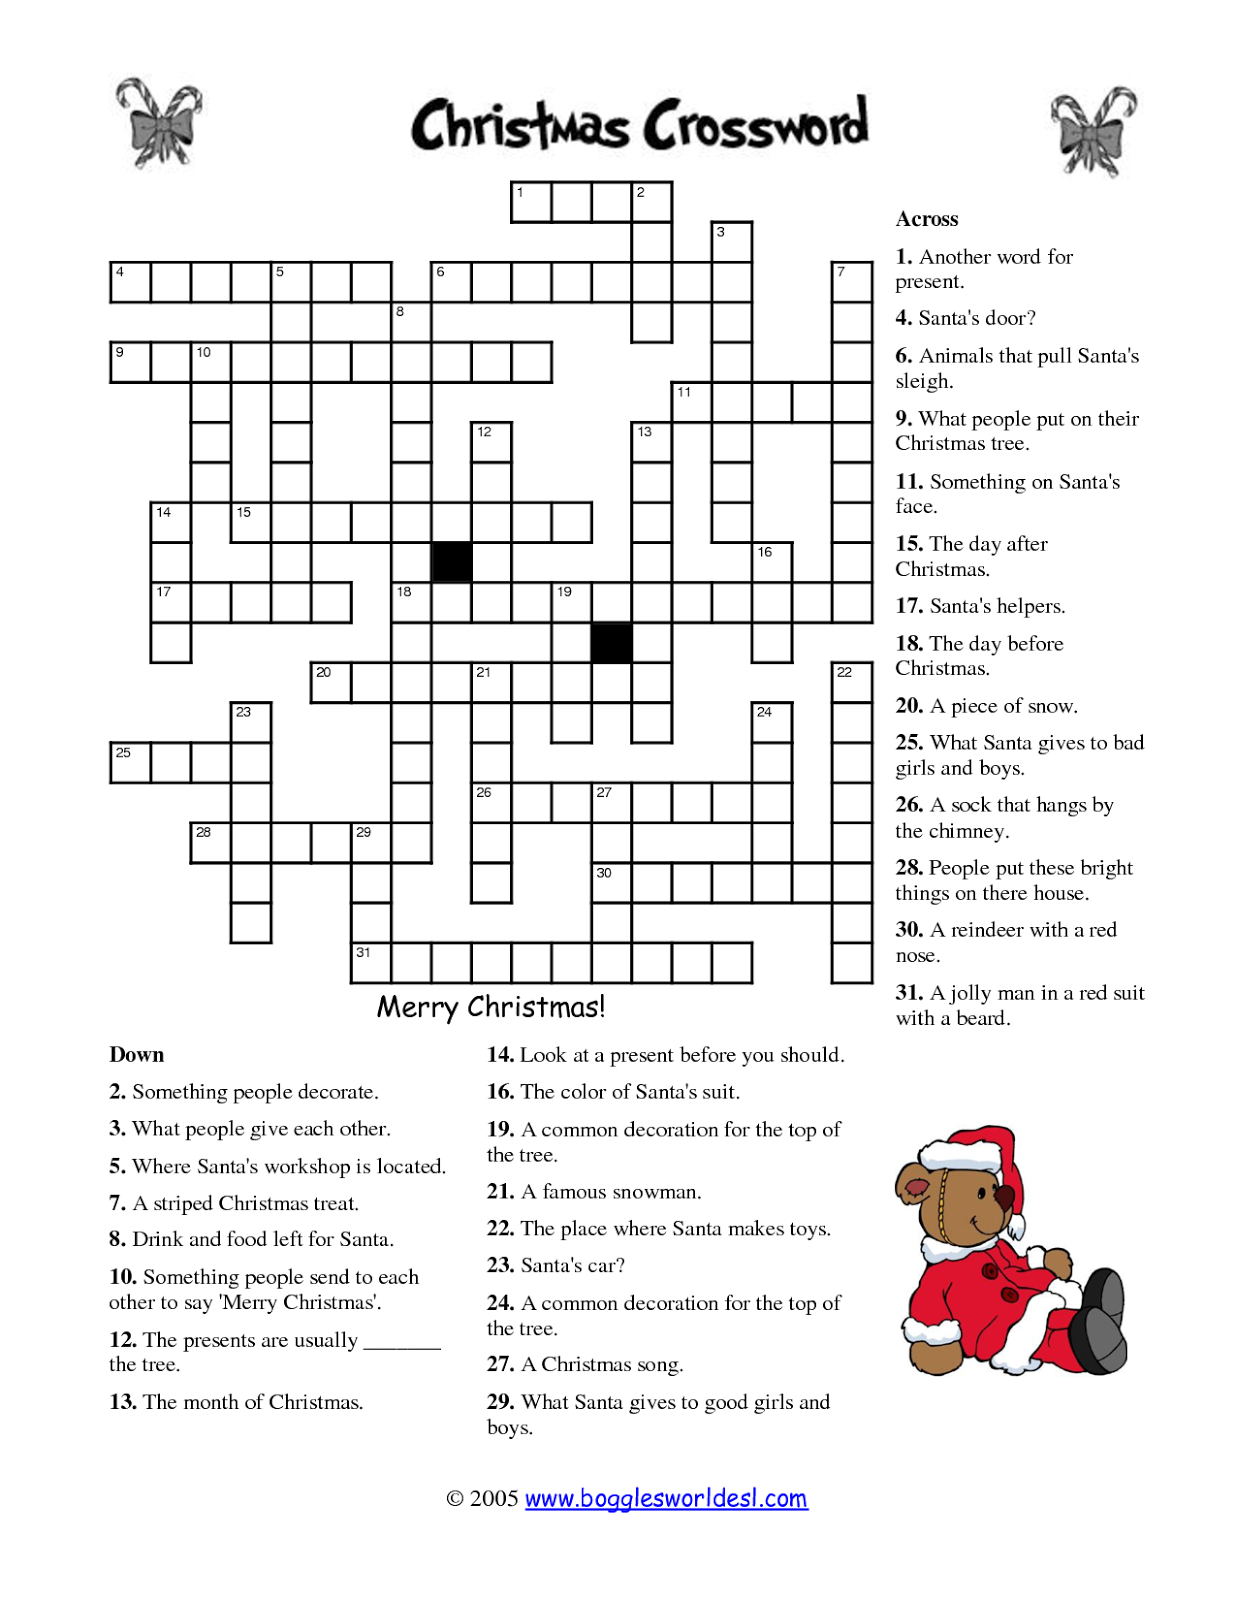 Free Printable Cards: Free Printable Crossword Puzzles | Christmas - Free Printable Christmas Crossword Puzzles For Adults